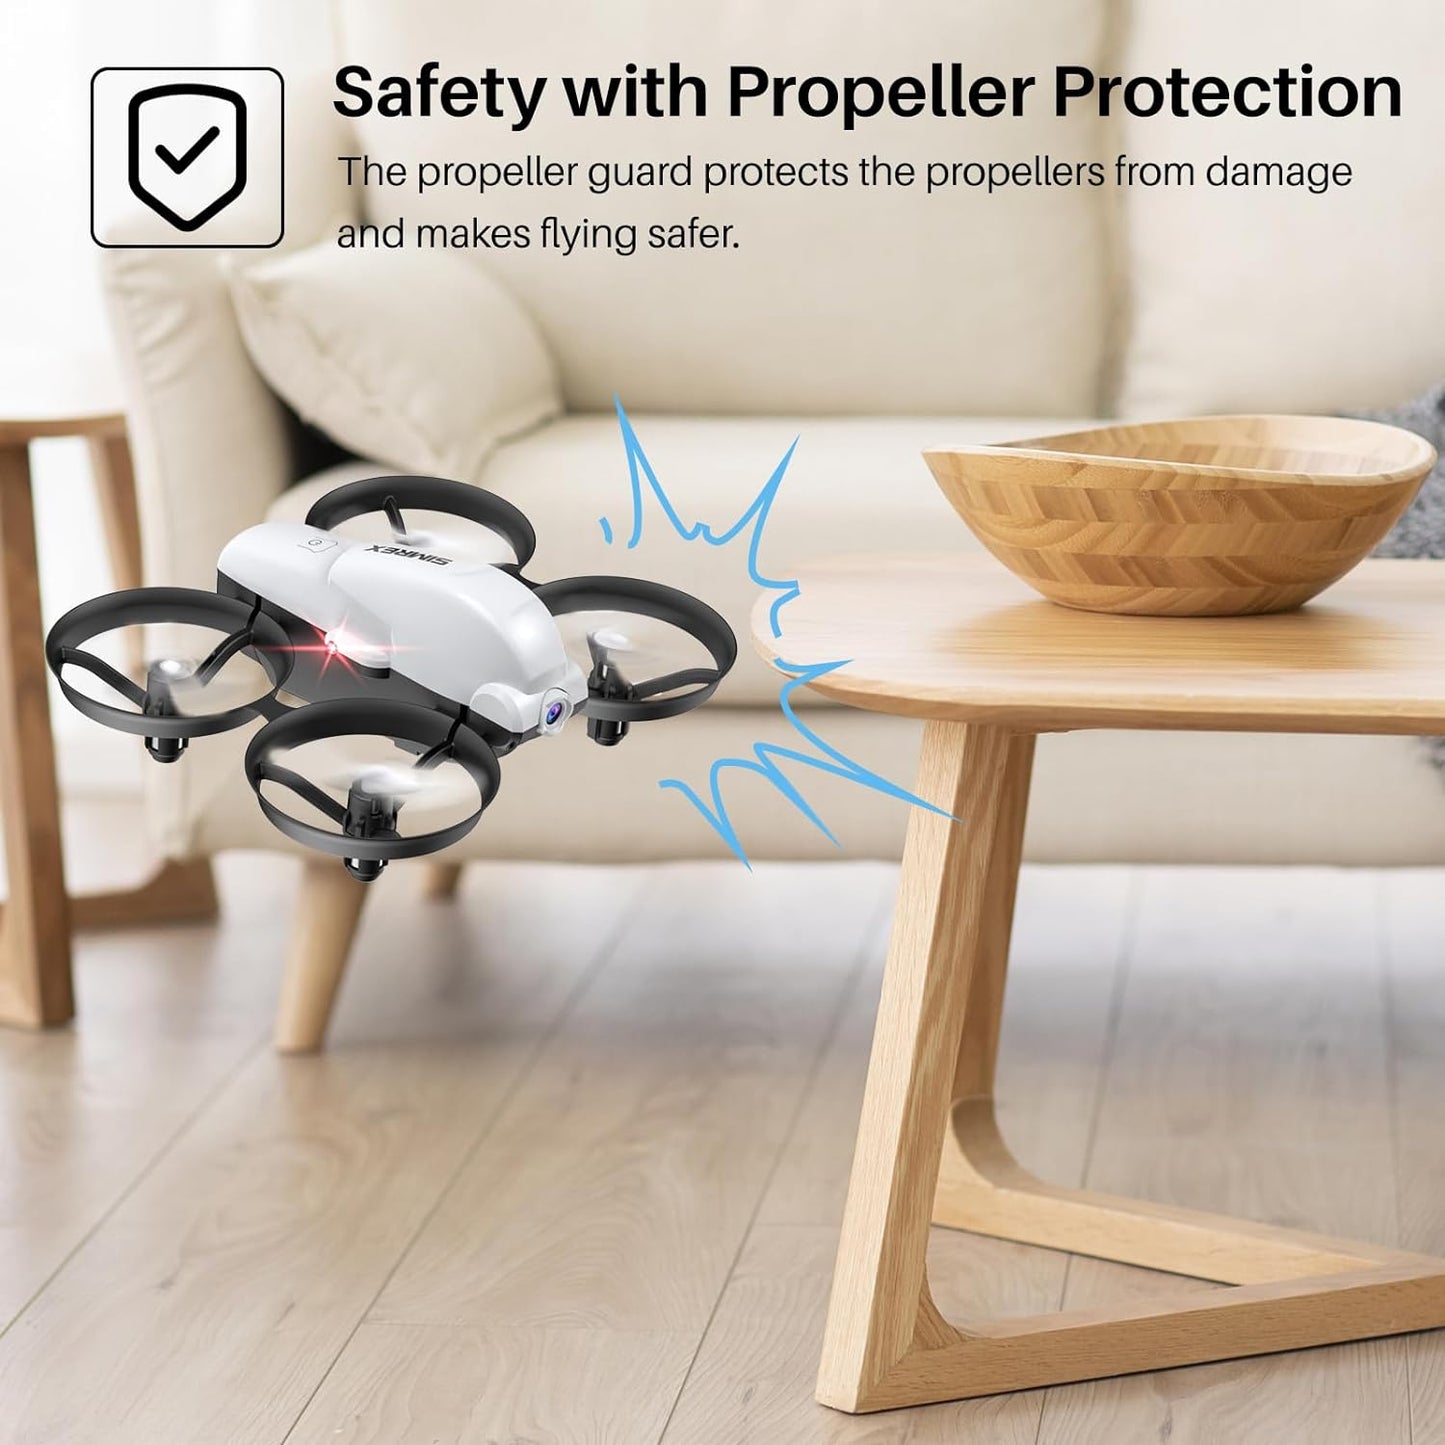 SIMREX X700 Drone, Propeller guard protects propellers from damage and makes flying safer